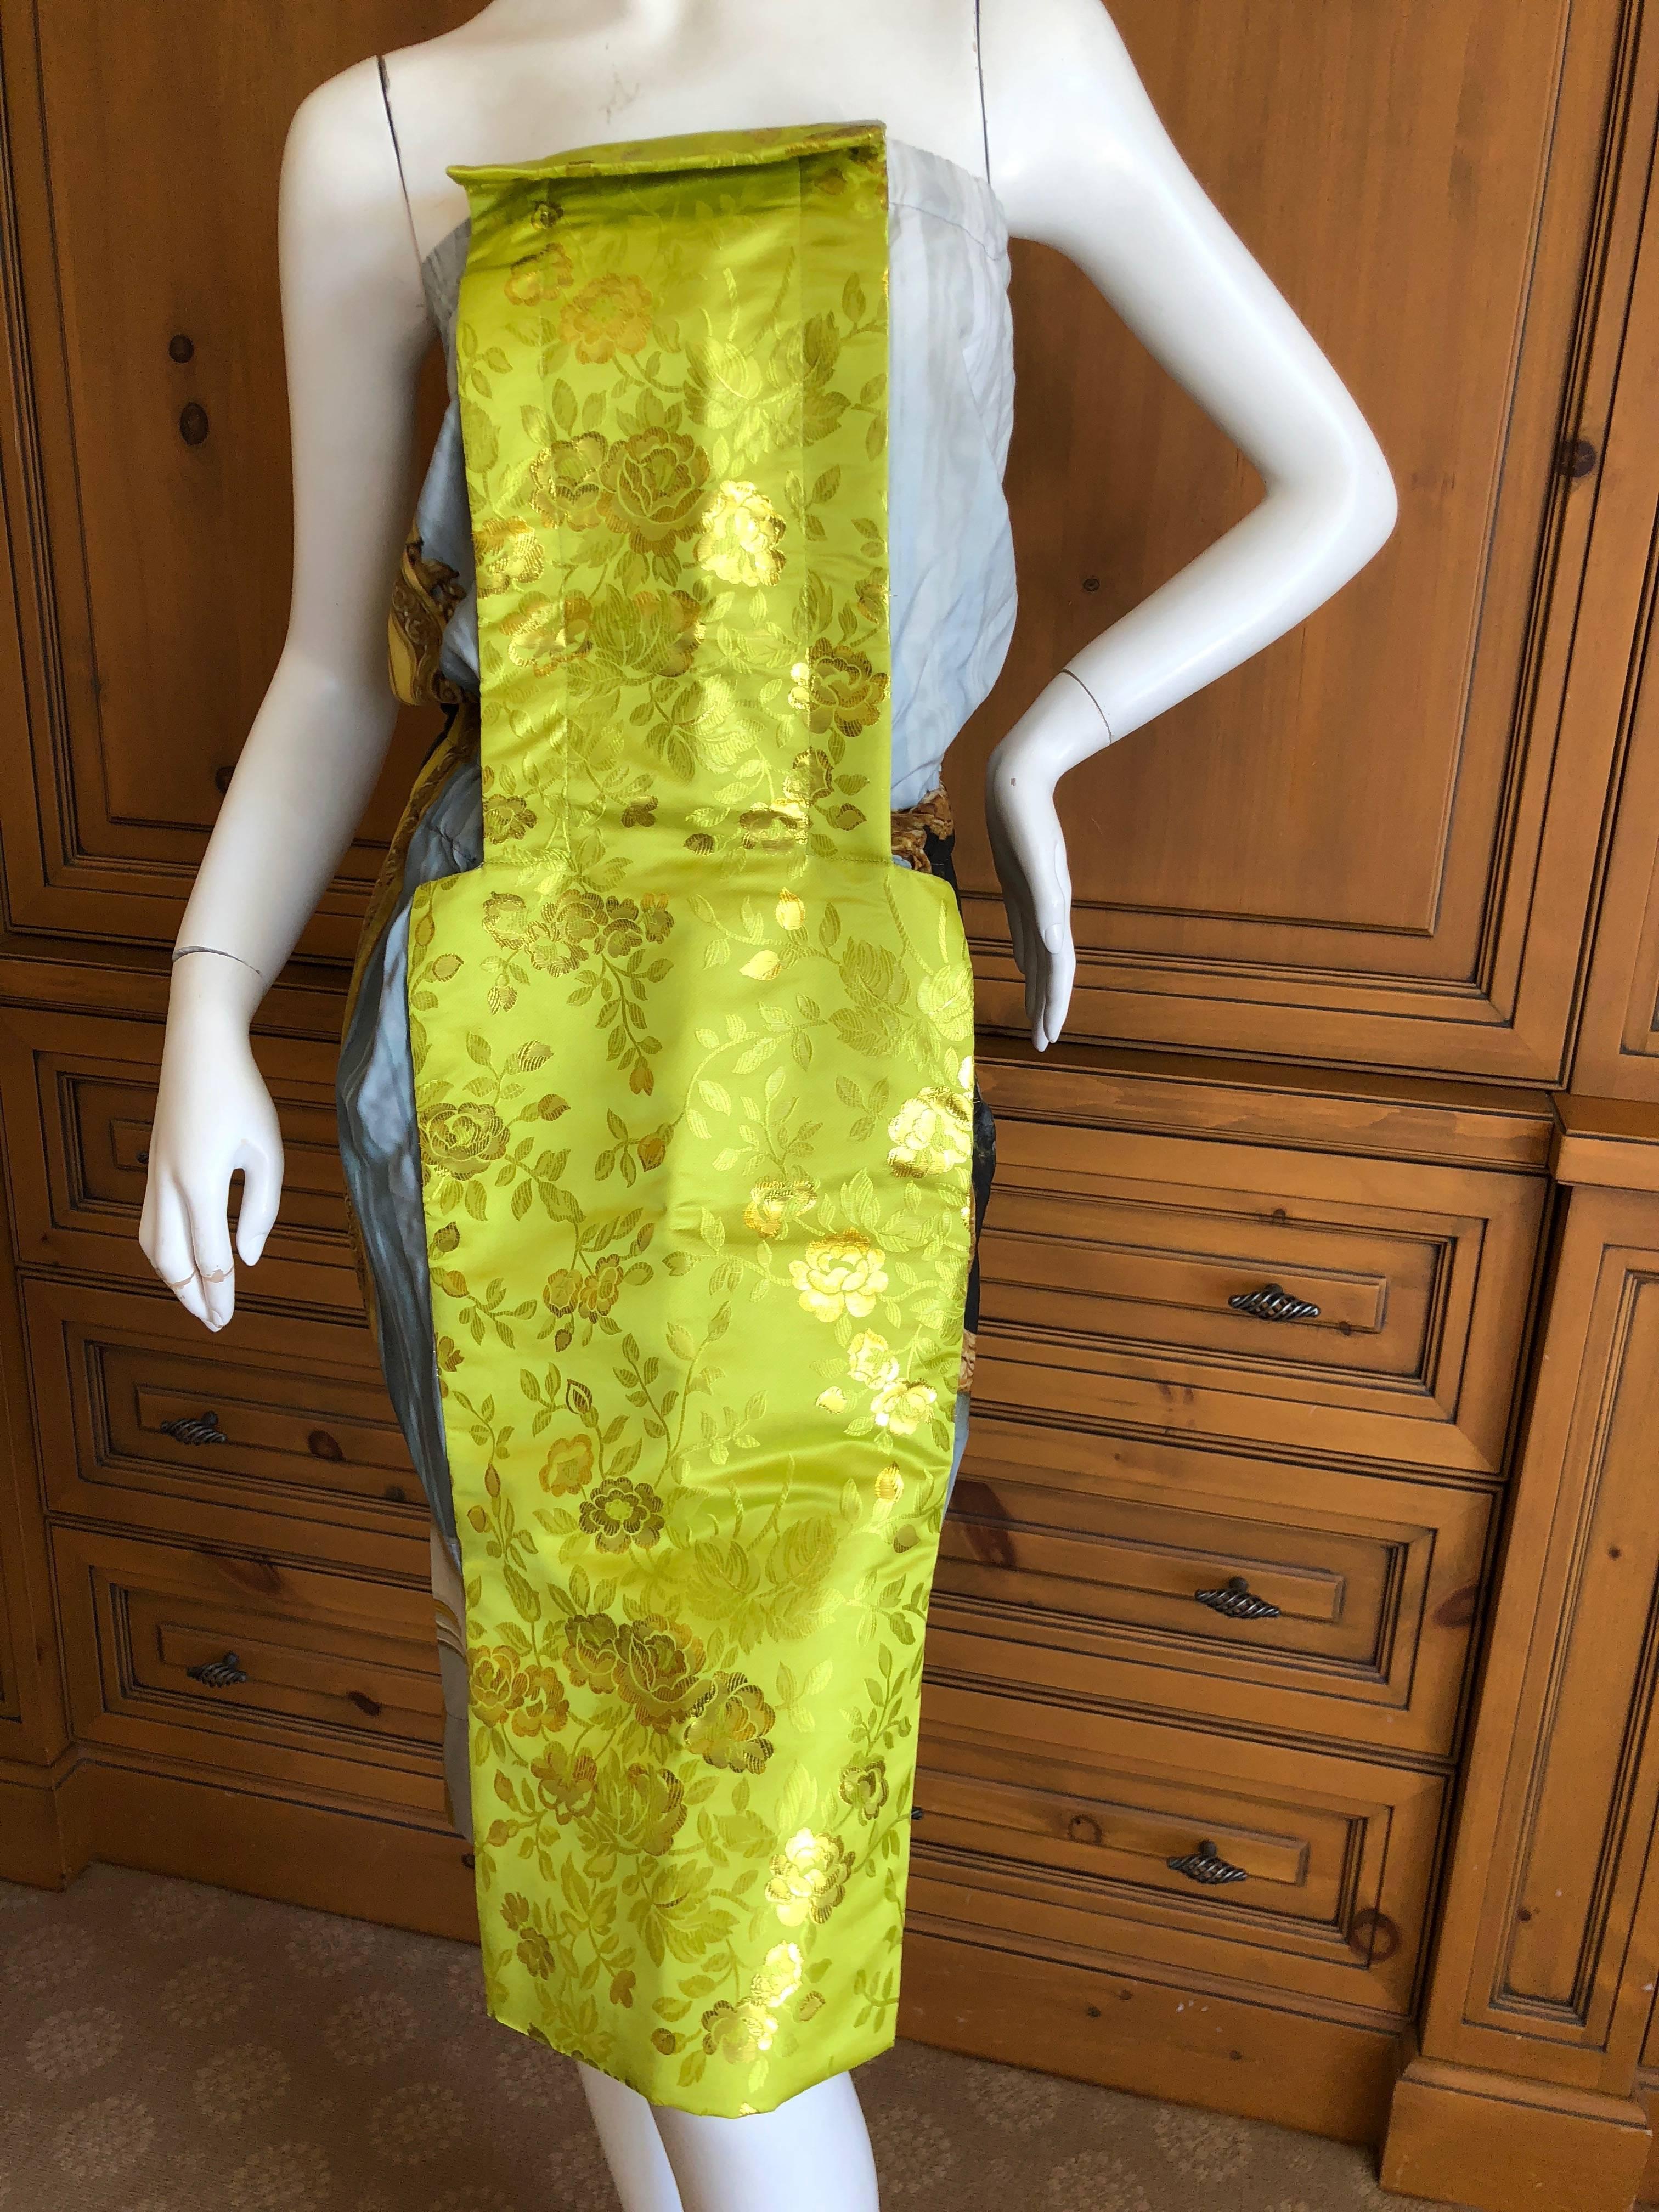 Vivienne Westwood Gold Label Dress 

Viscose silk blend with classical artworks in golden frames, with green brocade accent.
Elastic at the bust and waist.

NWT $3404

This is such a charming piece.
US size 4
Bust  34